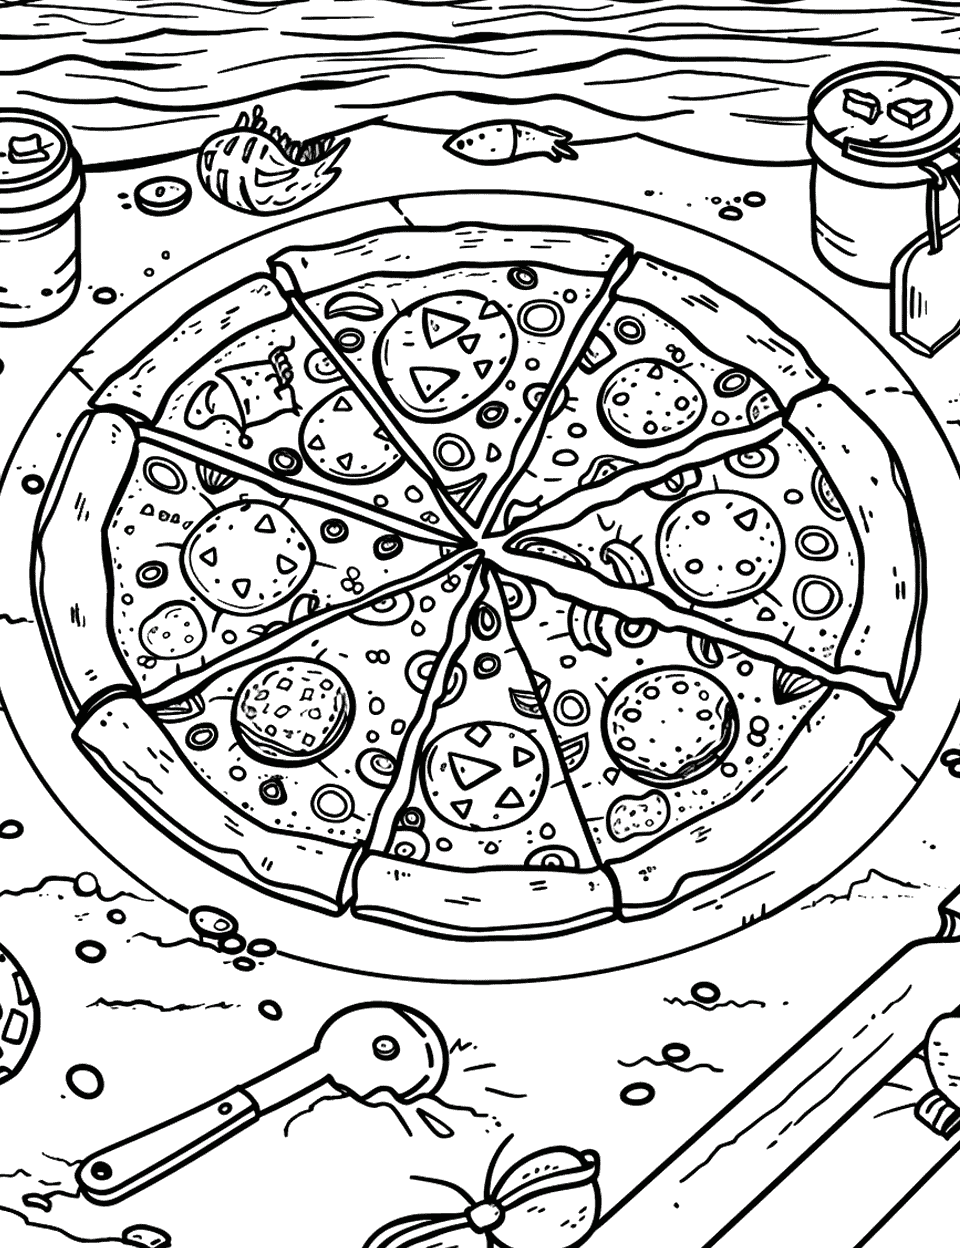 Pizza on the Beach Coloring Page - A picnic scene on the beach with a pizza in the center, surrounded by drinks and the pizza cutter.